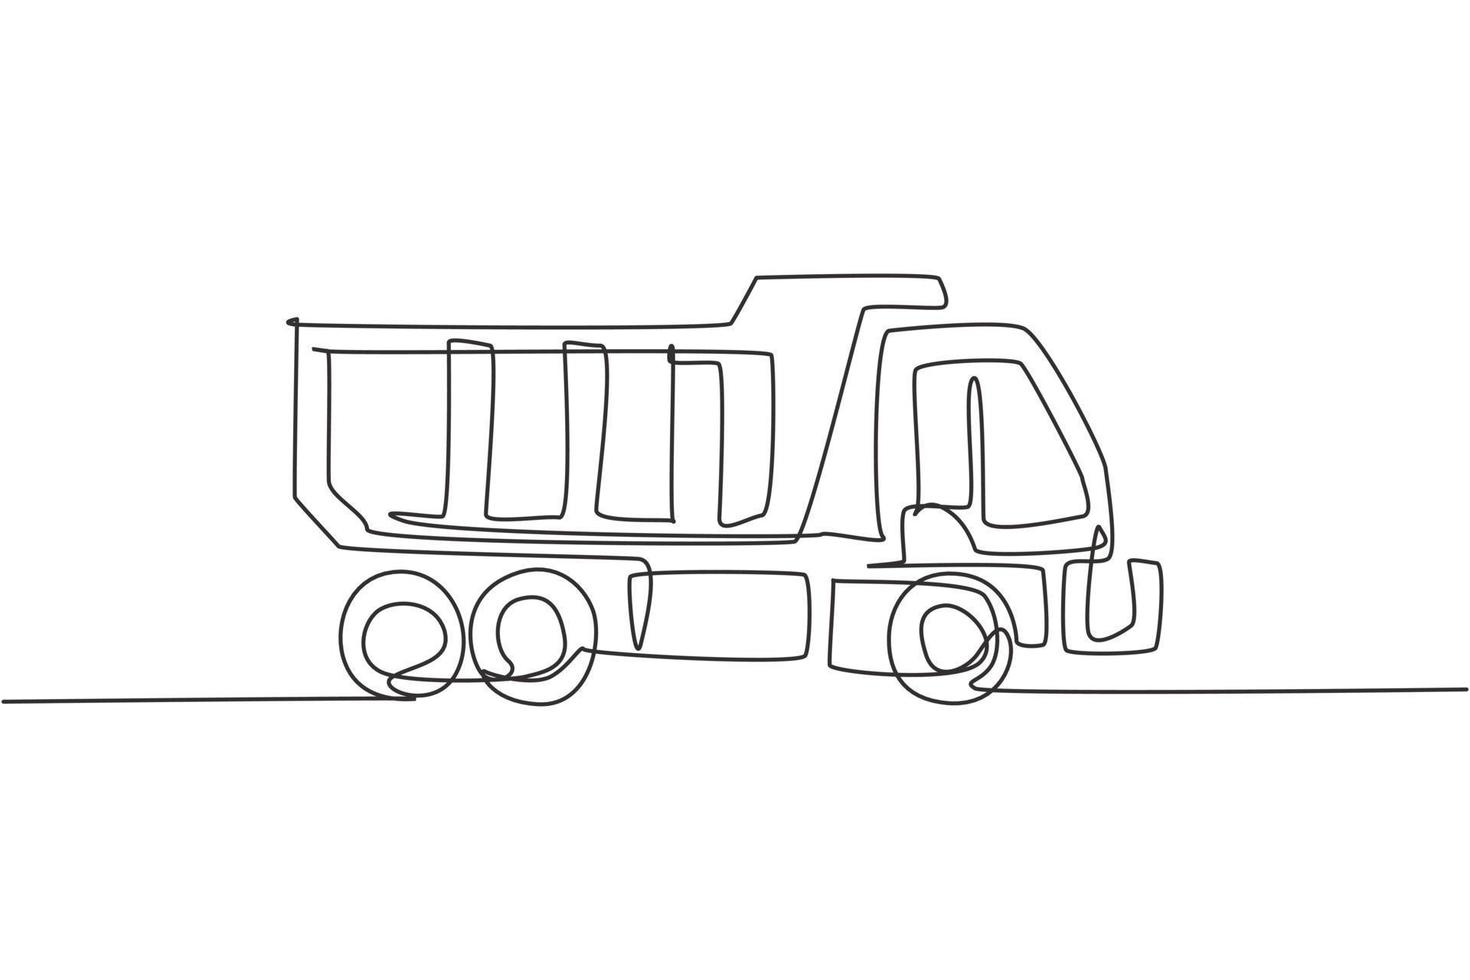 One continuous line drawing of long truck for cargo logistic delivery, business vehicle. Heavy transport trucks equipment concept. Dynamic single line draw design vector graphic illustration